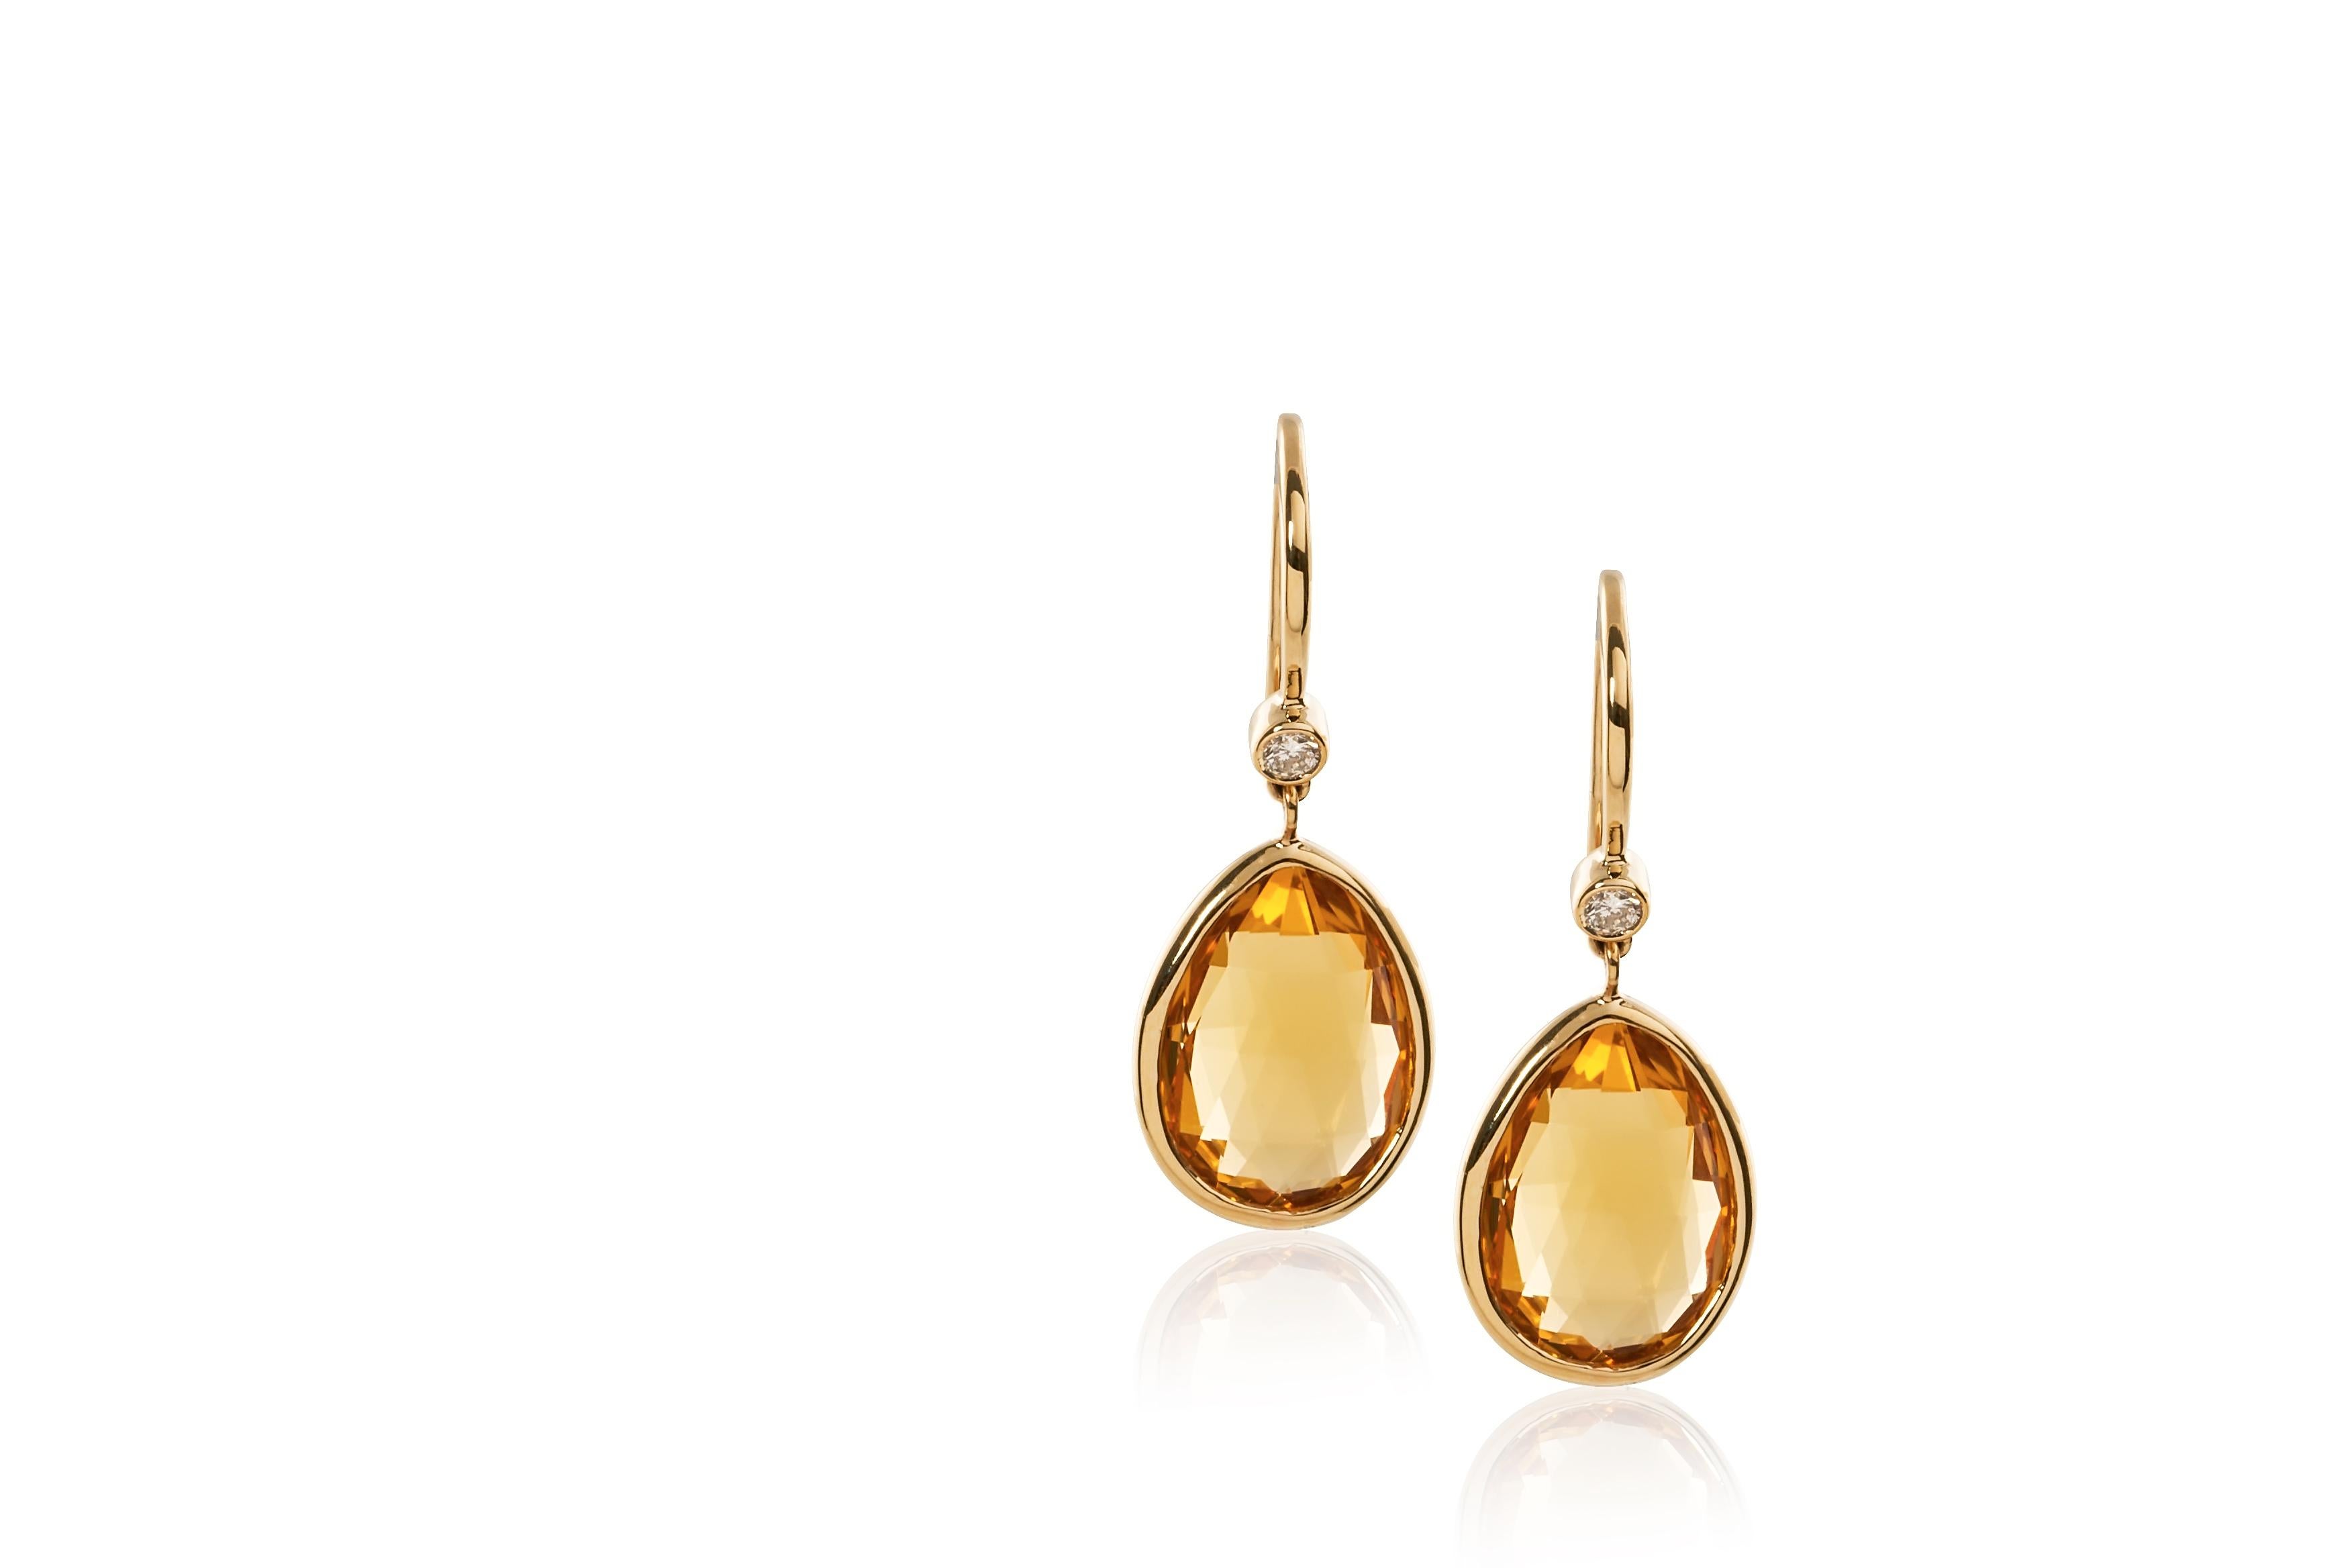 Citrine Pear Shape Briolette Earrings with Diamonds on French Wire in 18K Yellow Gold, from ‘Gossip’ Collection

Stone Size: 10 x 14 mm 

Gemstone Approx. Wt: Citrine- 10.22 Carats 

Diamonds: G-H / VS, Approx. Wt: 0.11 Carats